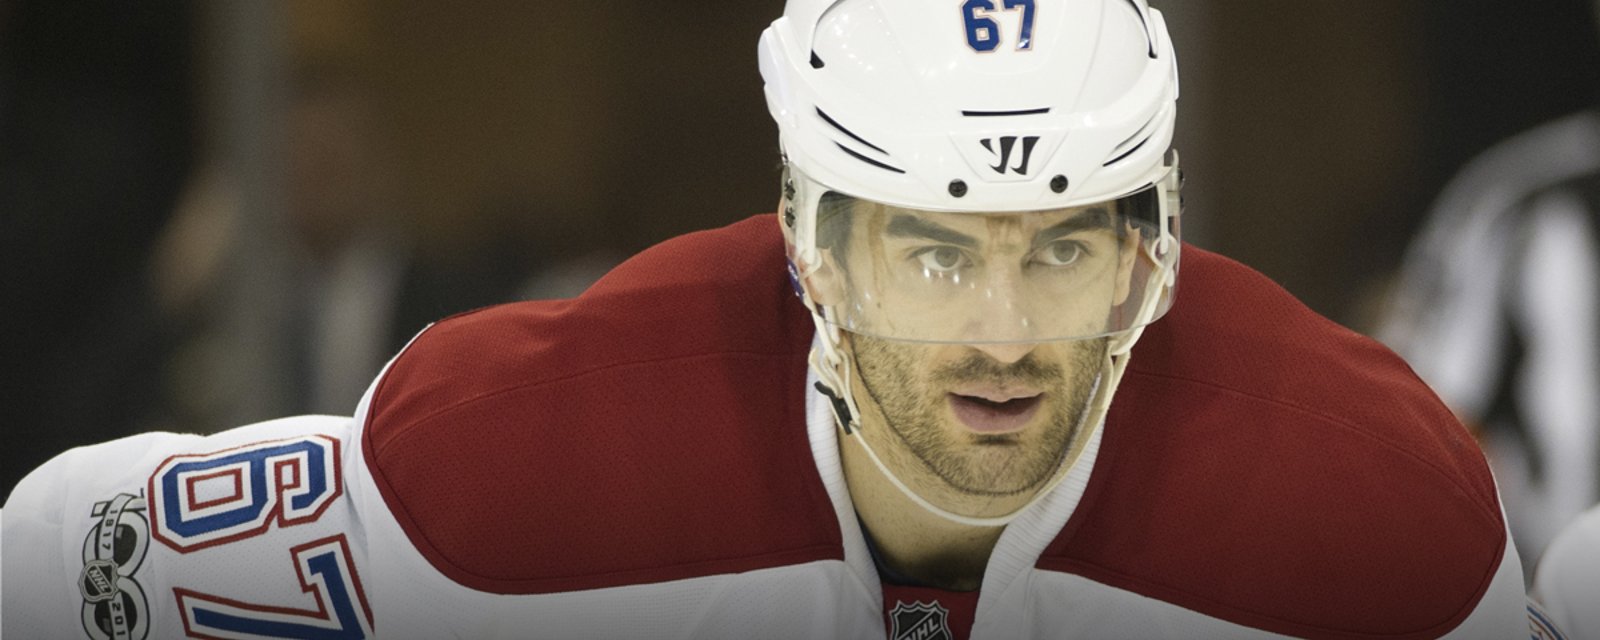 Report: Multiple teams in 'serious' trade talks for Pacioretty